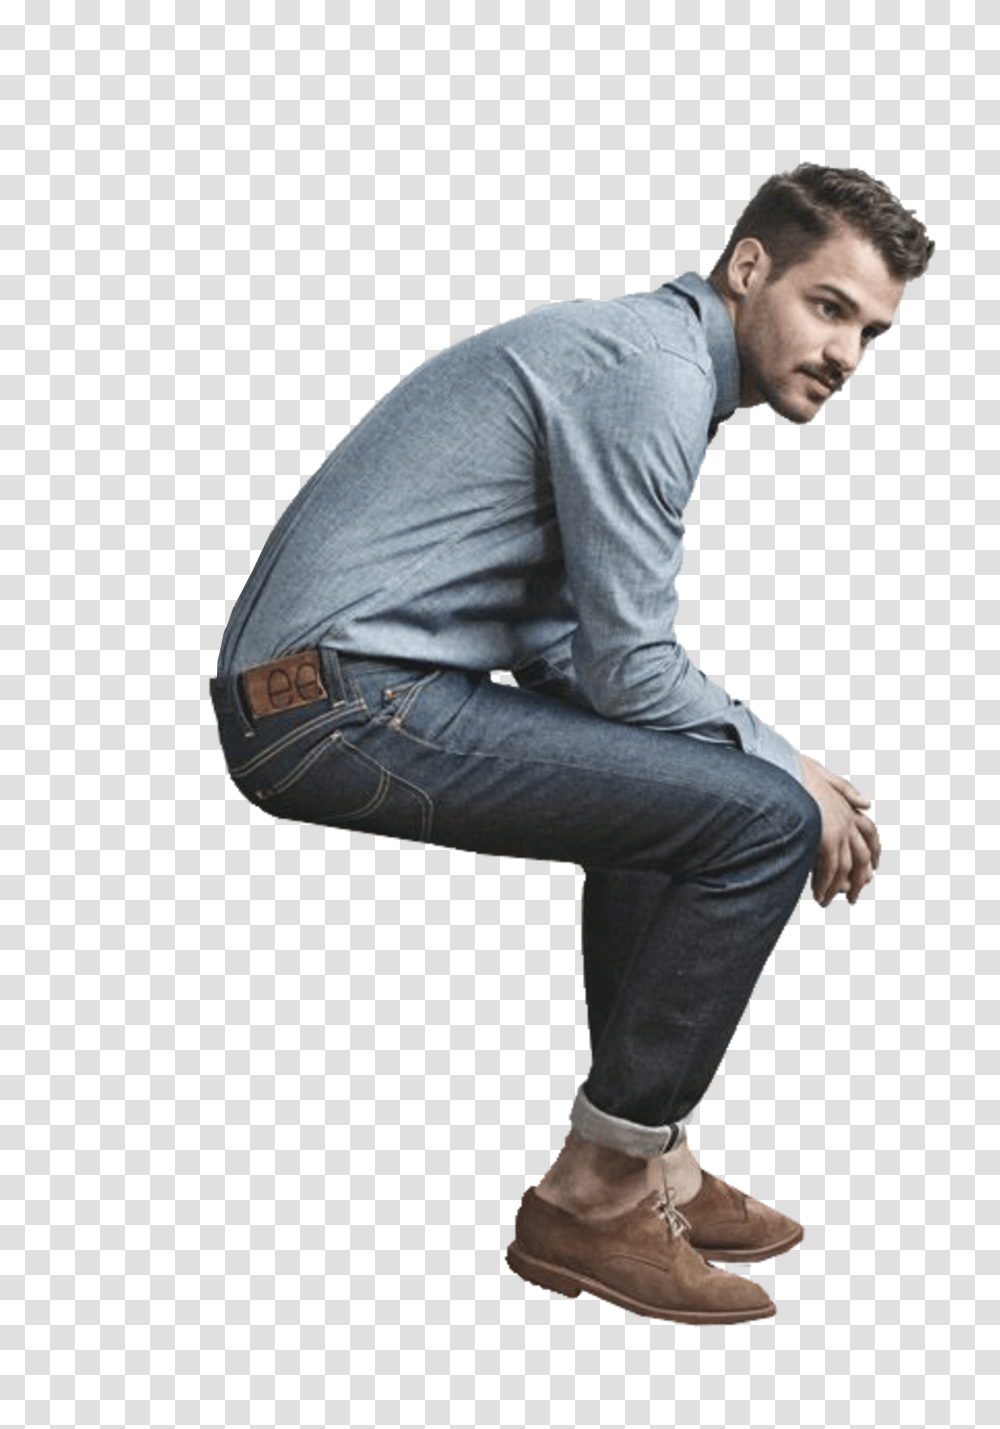 People Flat Illustration People Flat Illustration On Behance, Person, Clothing, Man, Sitting Transparent Png